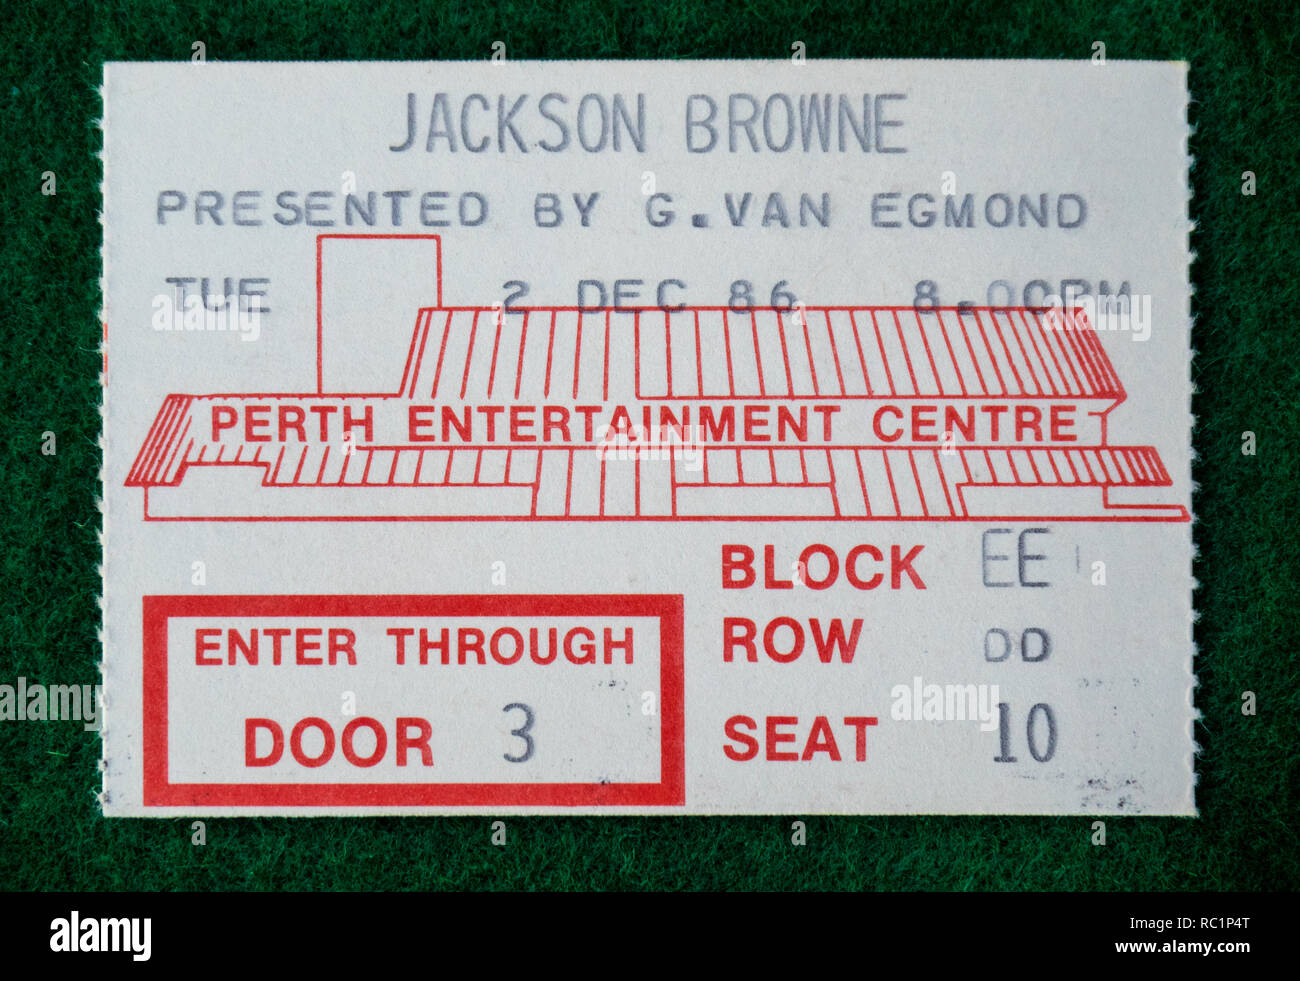 Ticket for Jackson Browne concert at Perth Entertainment Centre in 1986 WA Australia. Stock Photo